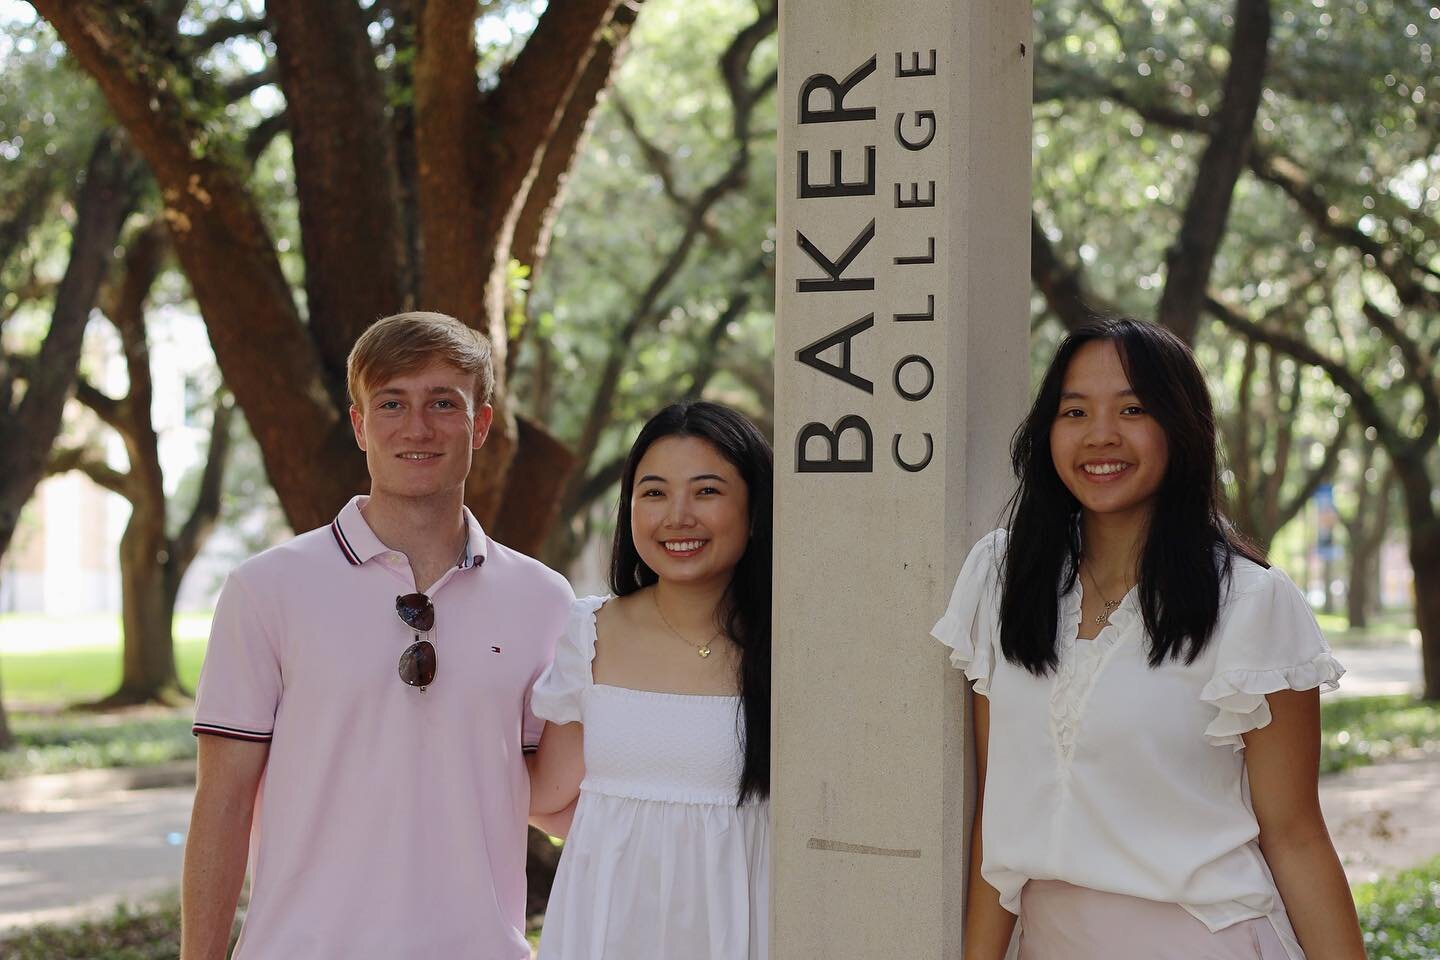 Hi New Students!! Welcome to Rice, but most importantly, welcome to BAKER!!!

We are LJJ (aka Lynn-Chi, Jennie, and Jacob), and we are the 2023 Baker O-Week Coordinators. We&rsquo;re here to help you with anything O-Week related! We are so honored to